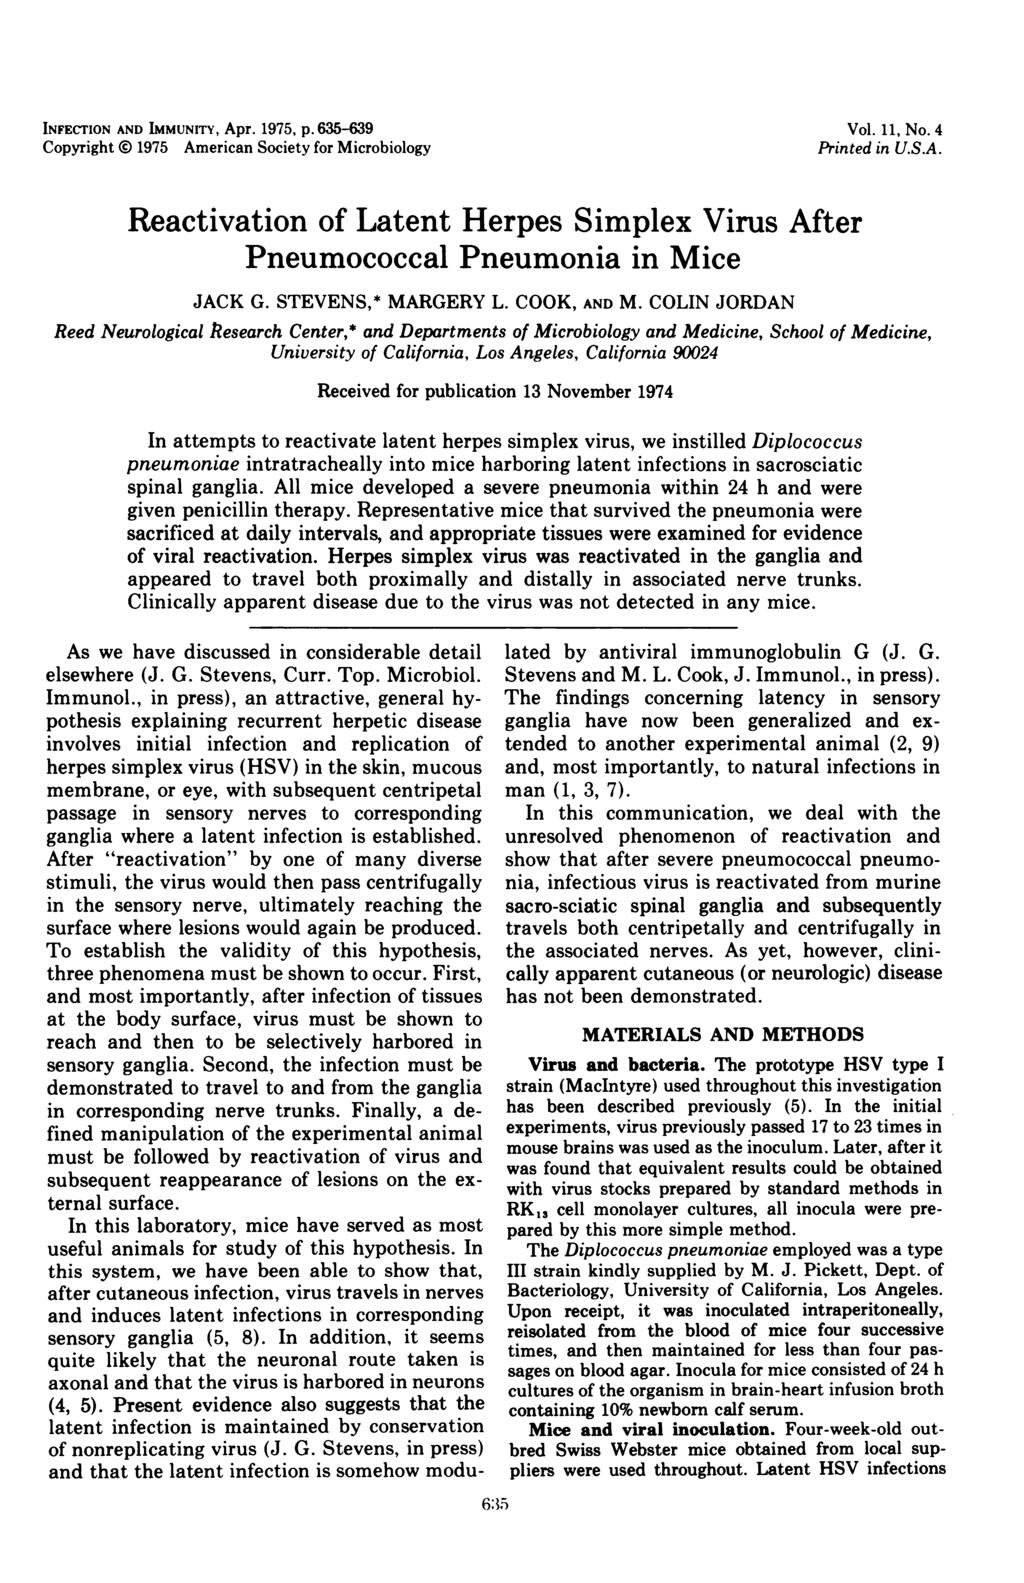 INFEcTION AND IMMUNITY, Apr. 1975, p. 635-639 Copyright 0 1975 American Society for Microbiology Vol. 11, No. 4 Printed in U.S.A. Reactivation of Latent Herpes Simplex Virus After Pneumococcal Pneumonia in Mice JACK G.